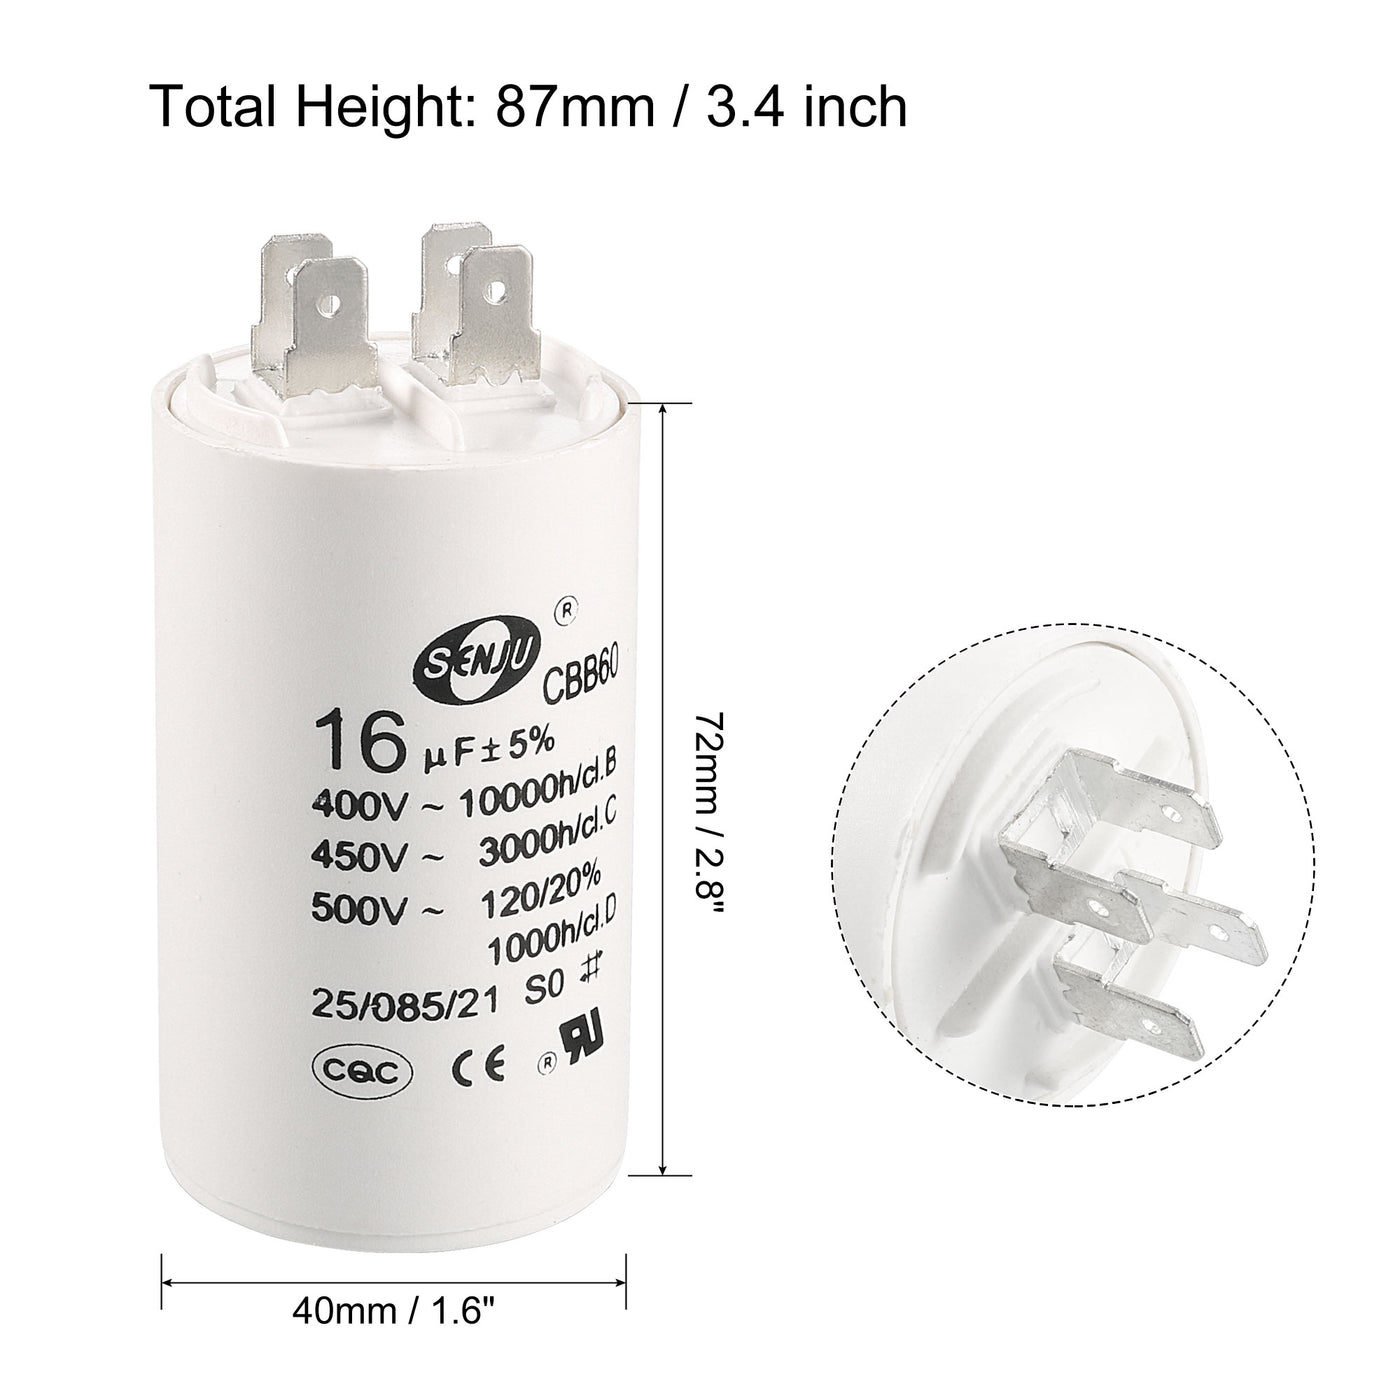 uxcell Uxcell CBB60 Run Capacitor 16uF 450V AC Double Insert 50/60Hz Cylinder 72x40mm White for Air Compressor Water Pump Motor